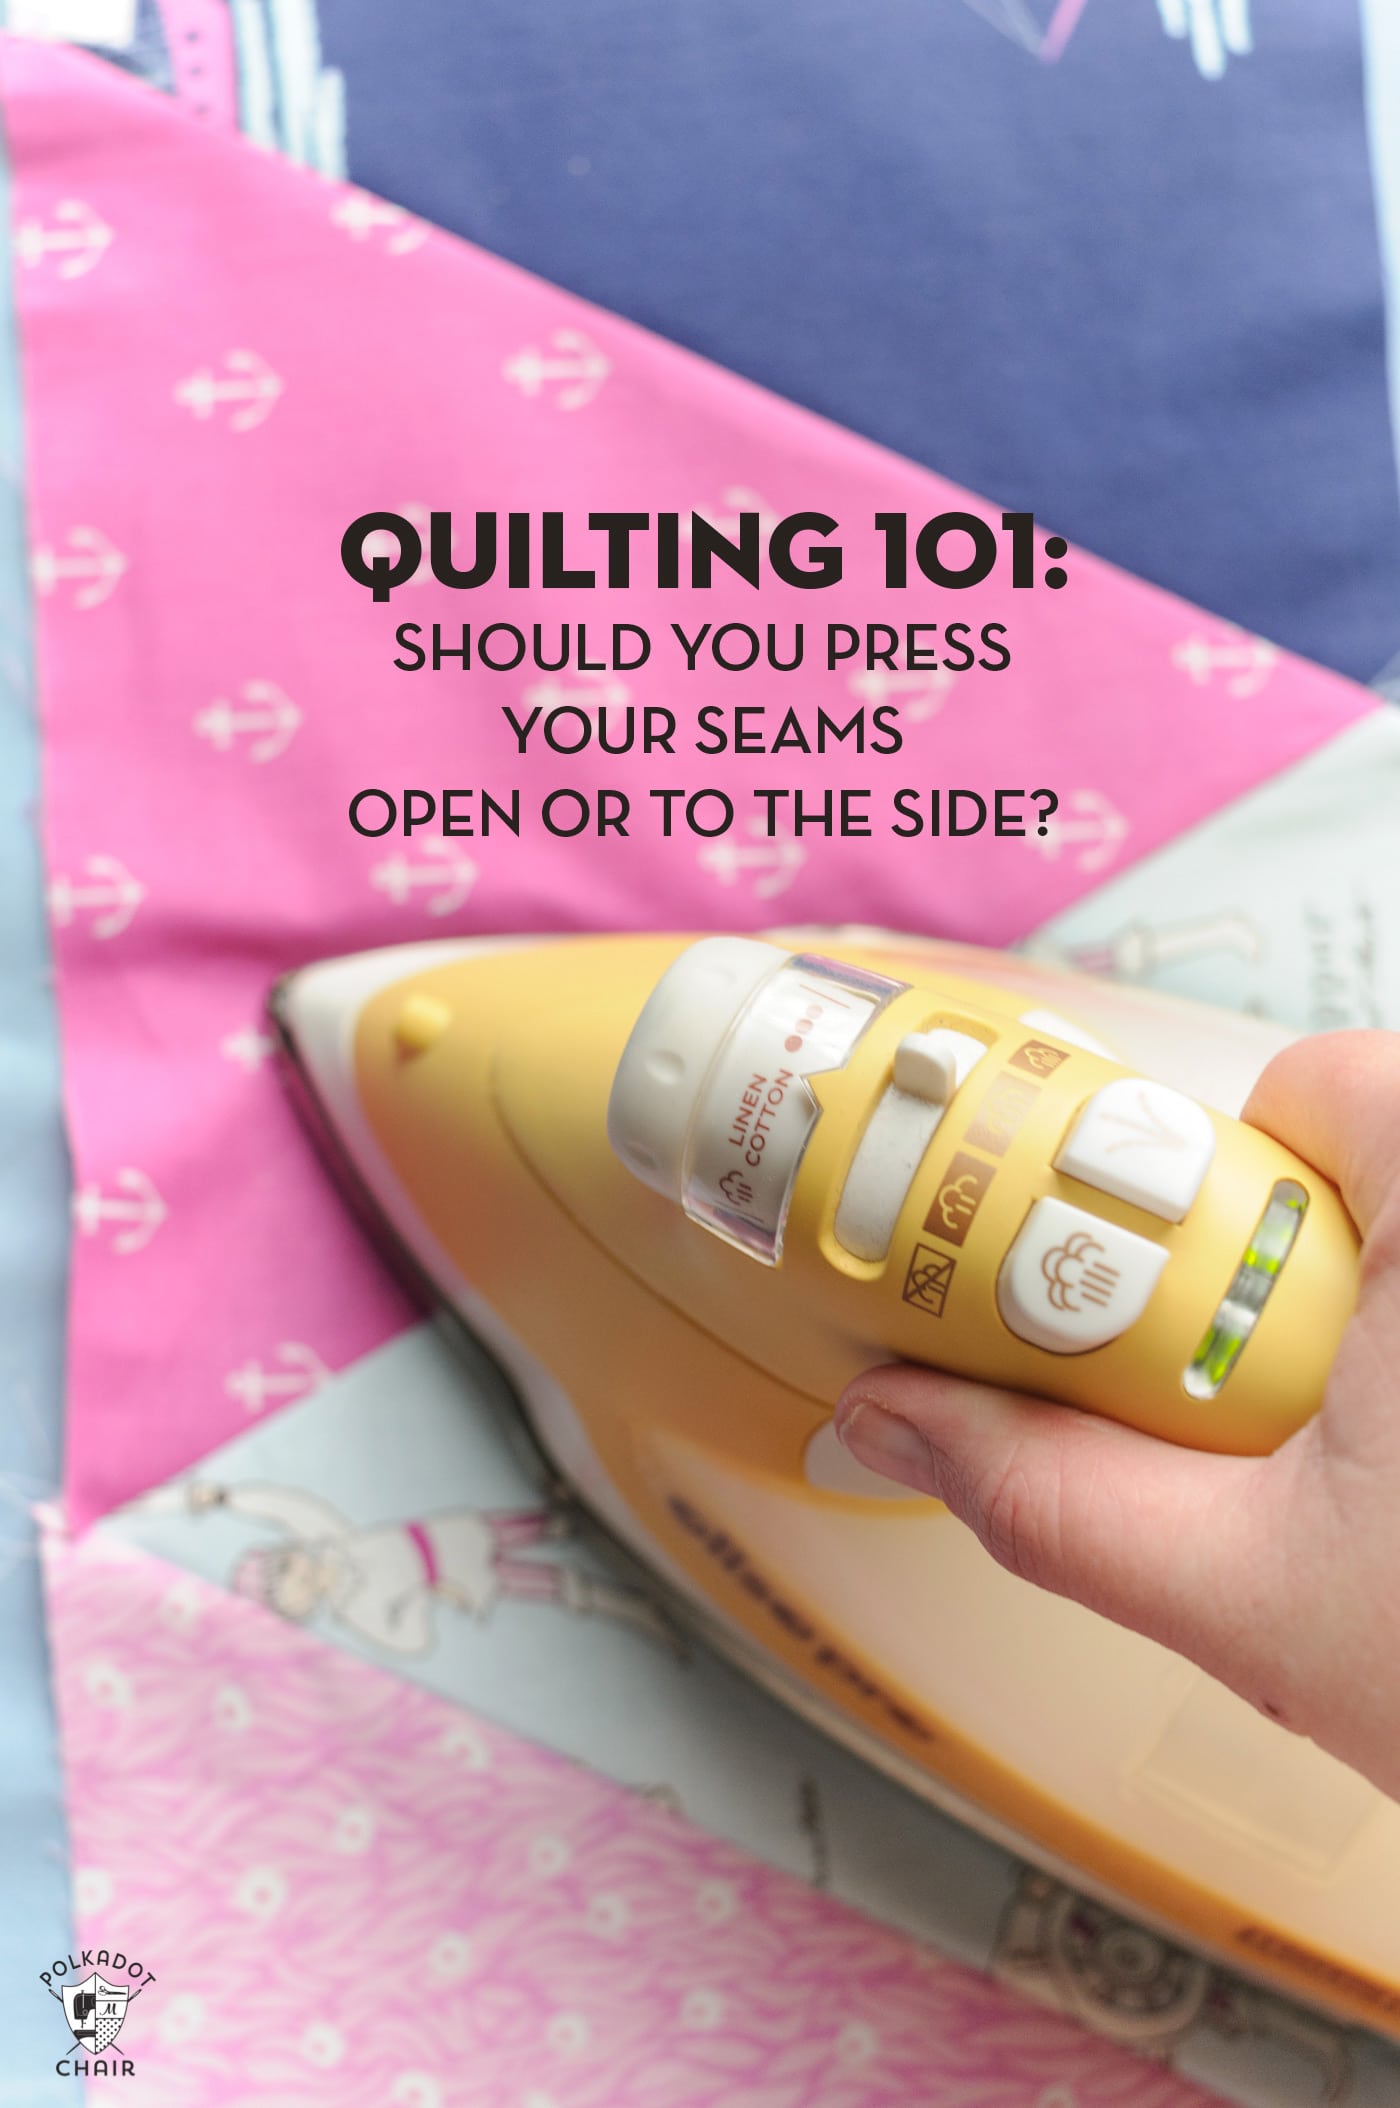 Quilting 101: Should You Press Seams Open or to the Side?